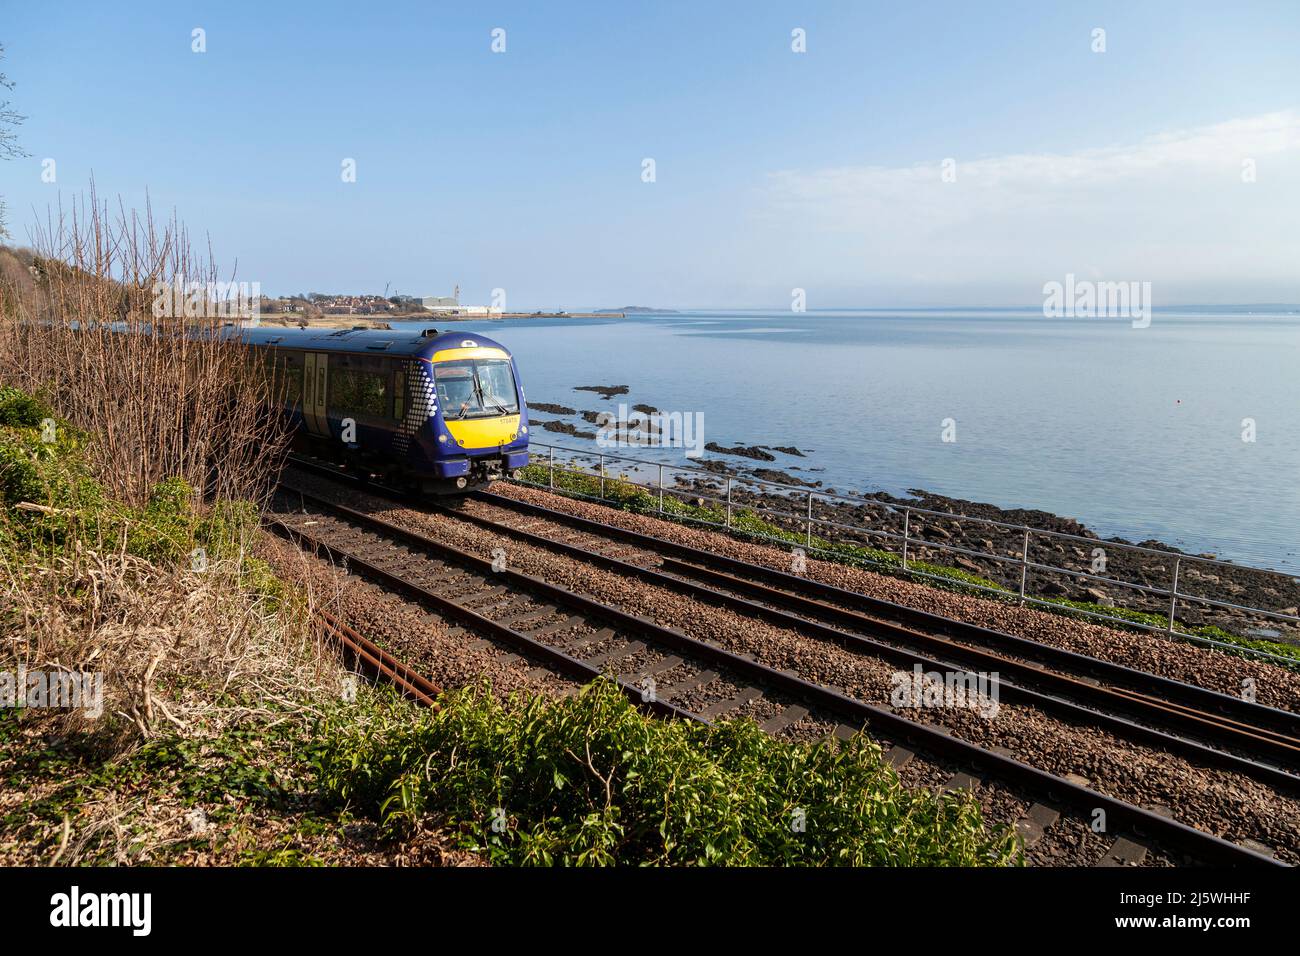 A train on the picturesque coastal line between Burntisland and Aberdour, Fife, Scotland Stock Photo